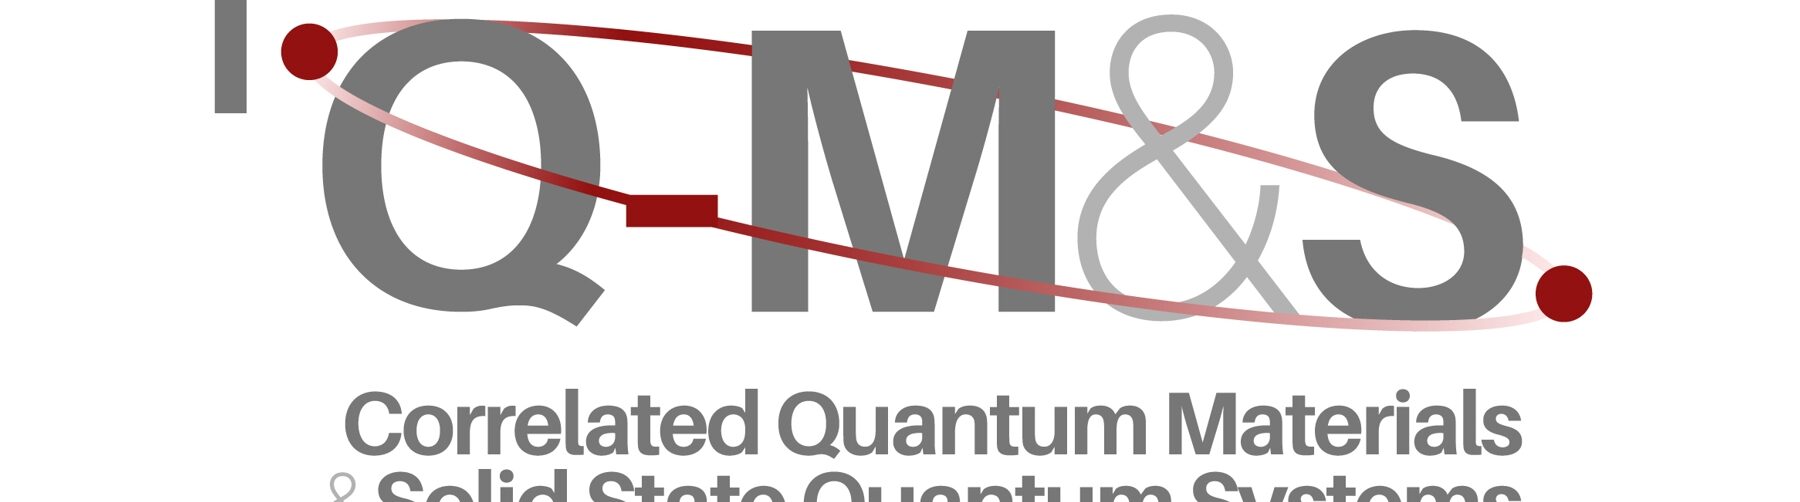 Project acronym Q-M&S and title Correlated Quantum Materials & Solid State Quantum Systems